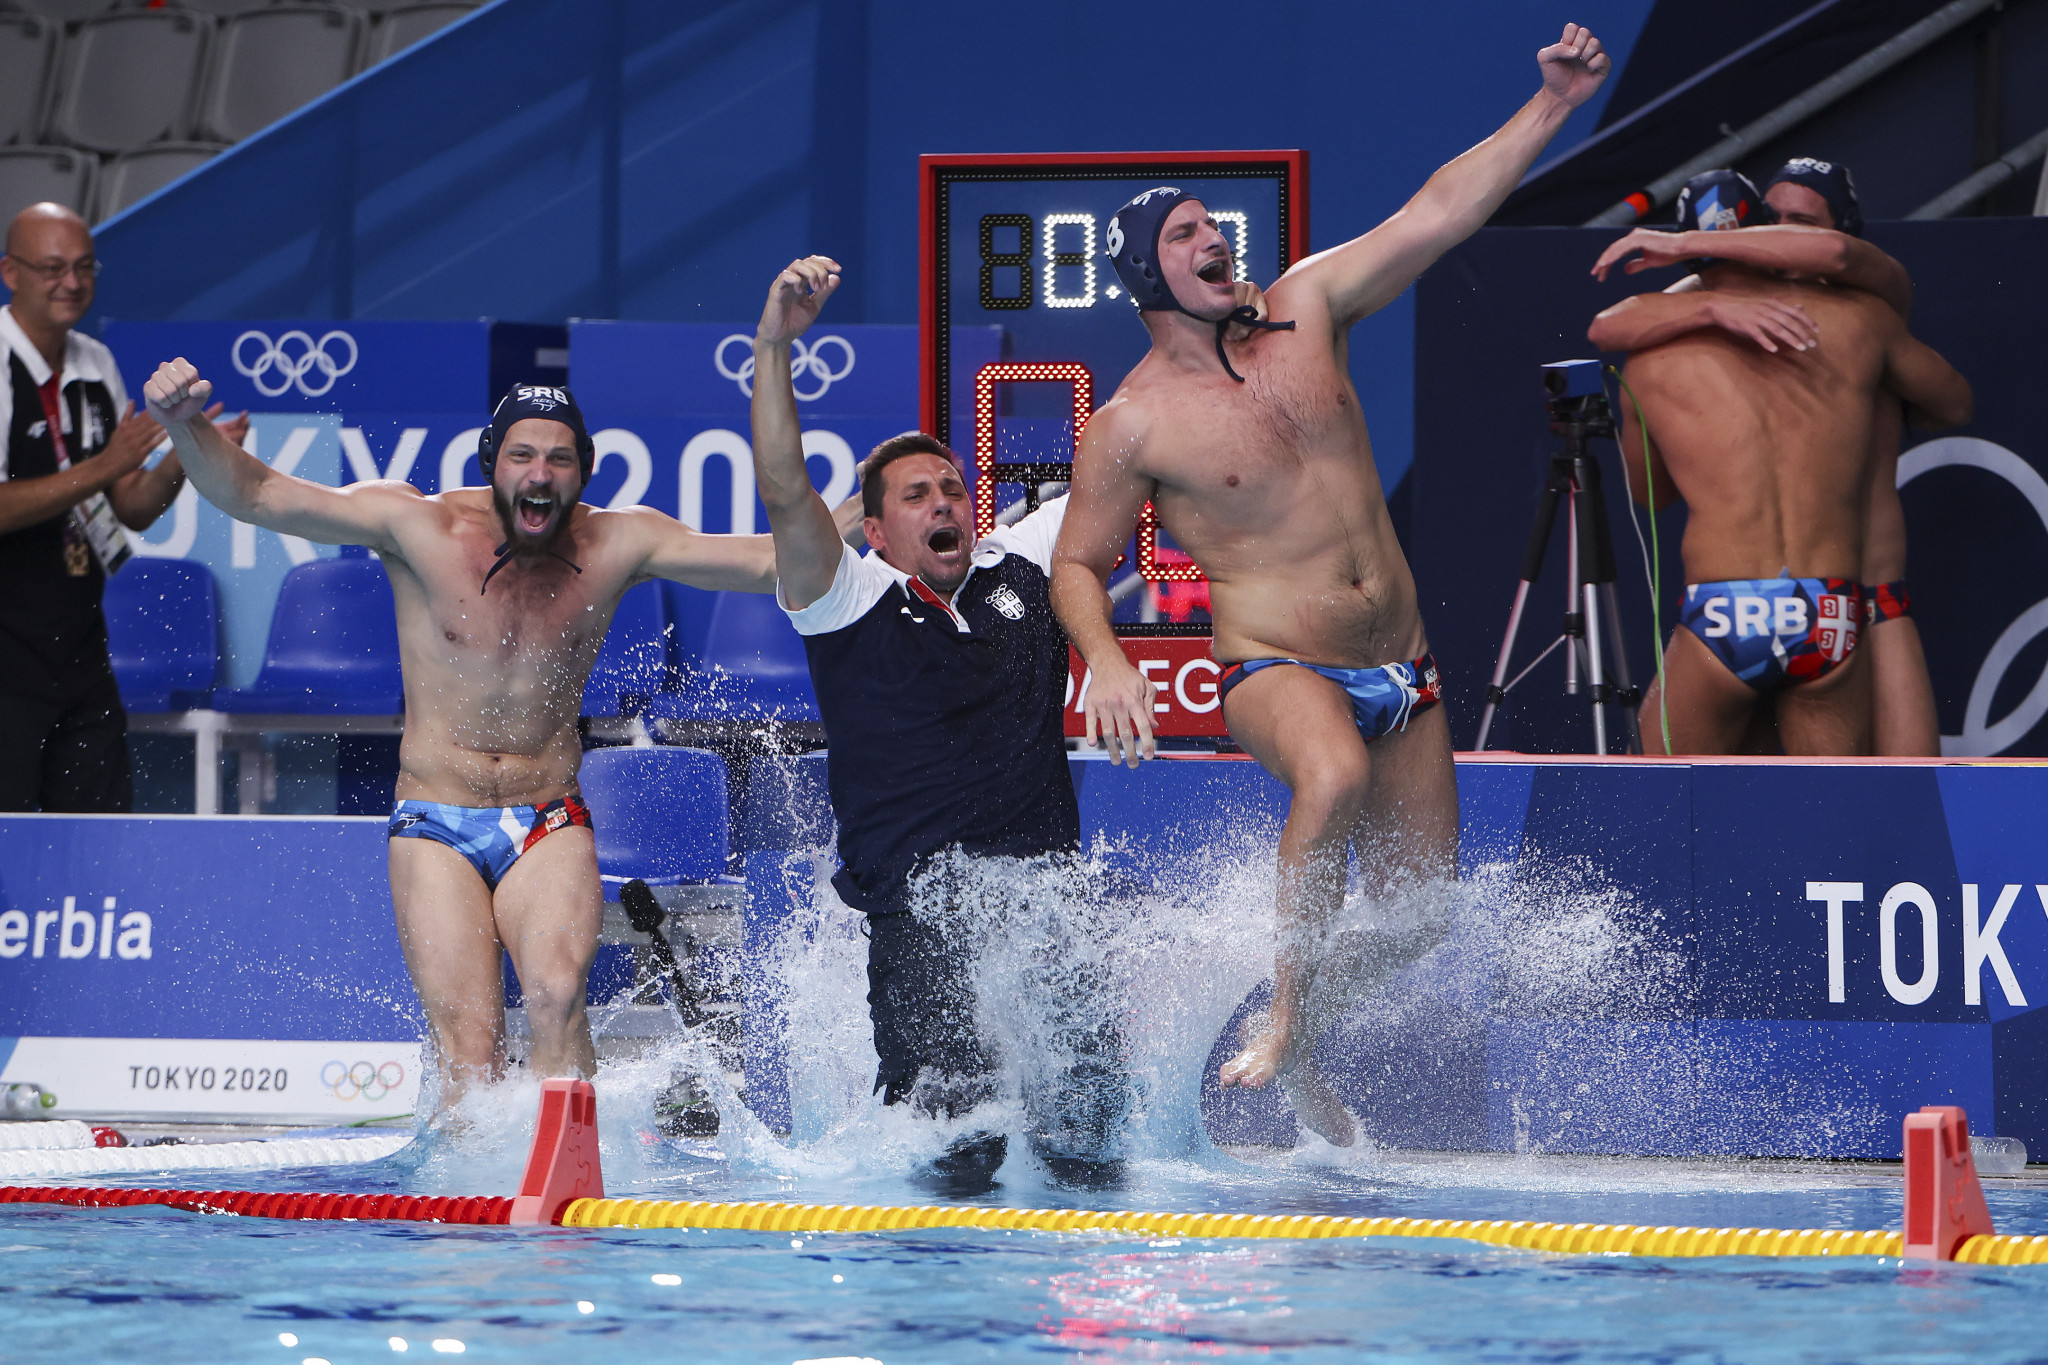 Serbia celebrate after defeating Greece to win the men's water polo final - the last sporting action to conclude at Tokyo 2020 ©Getty Images